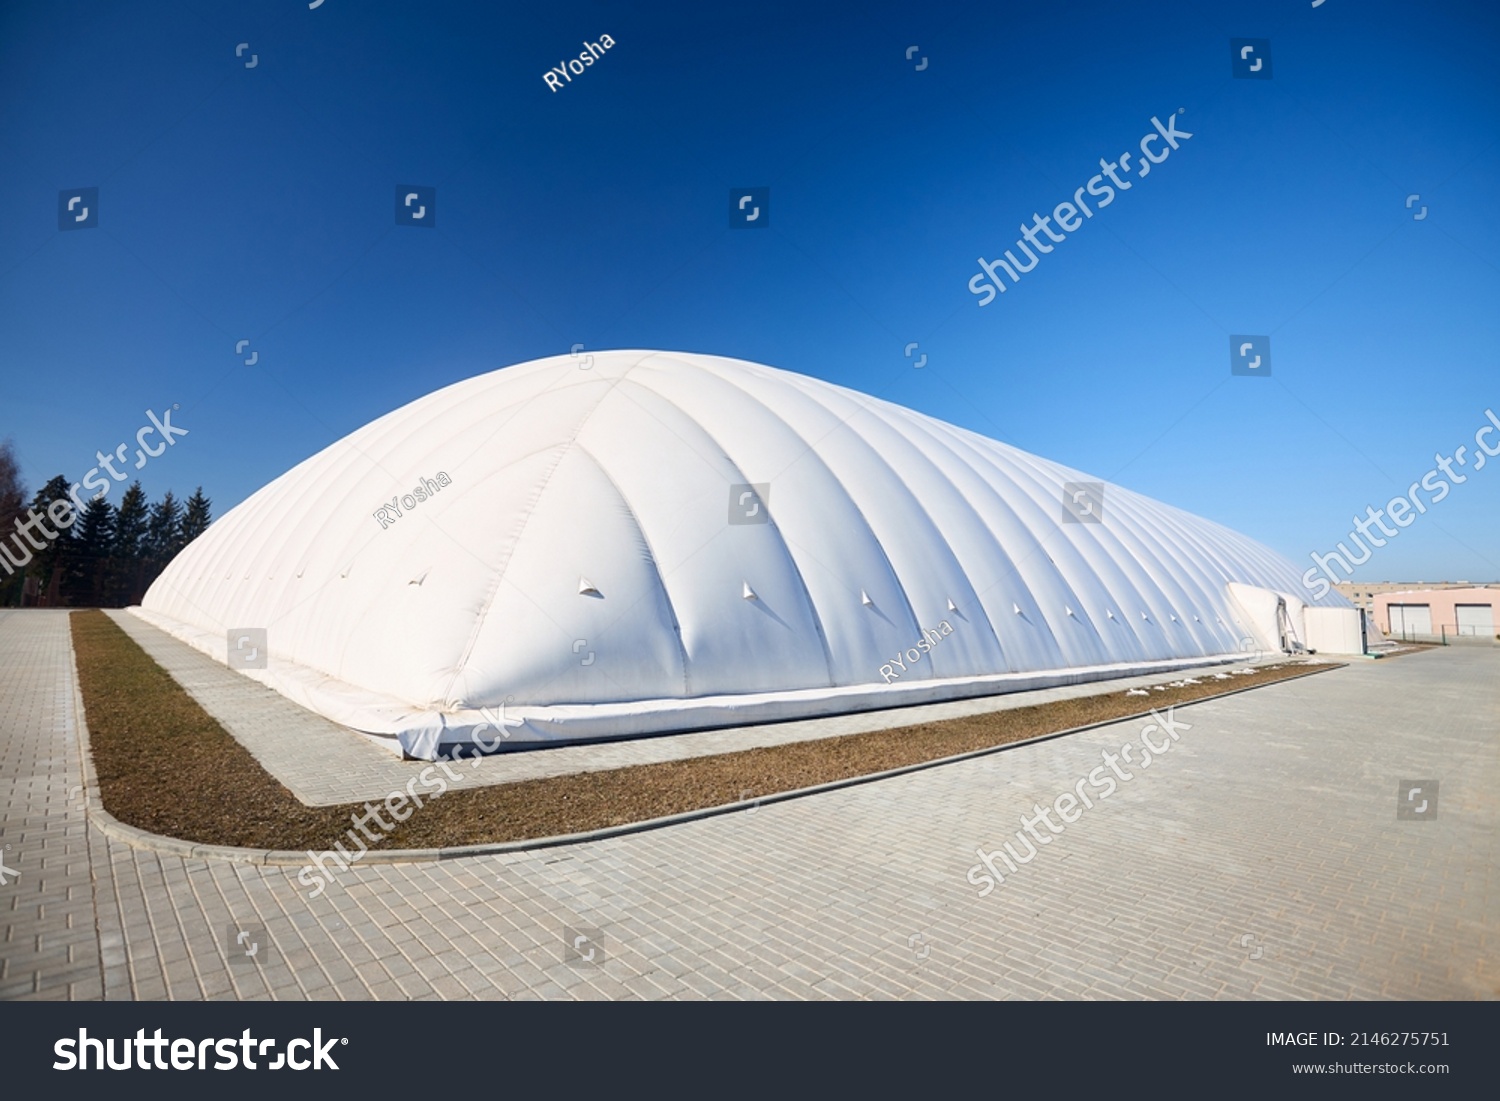 Inflatable air dome stadium. Inflated Tennis air dome or Tennis bubble arena. Modern urban architecture example as pneumatic stadium dome. #2146275751